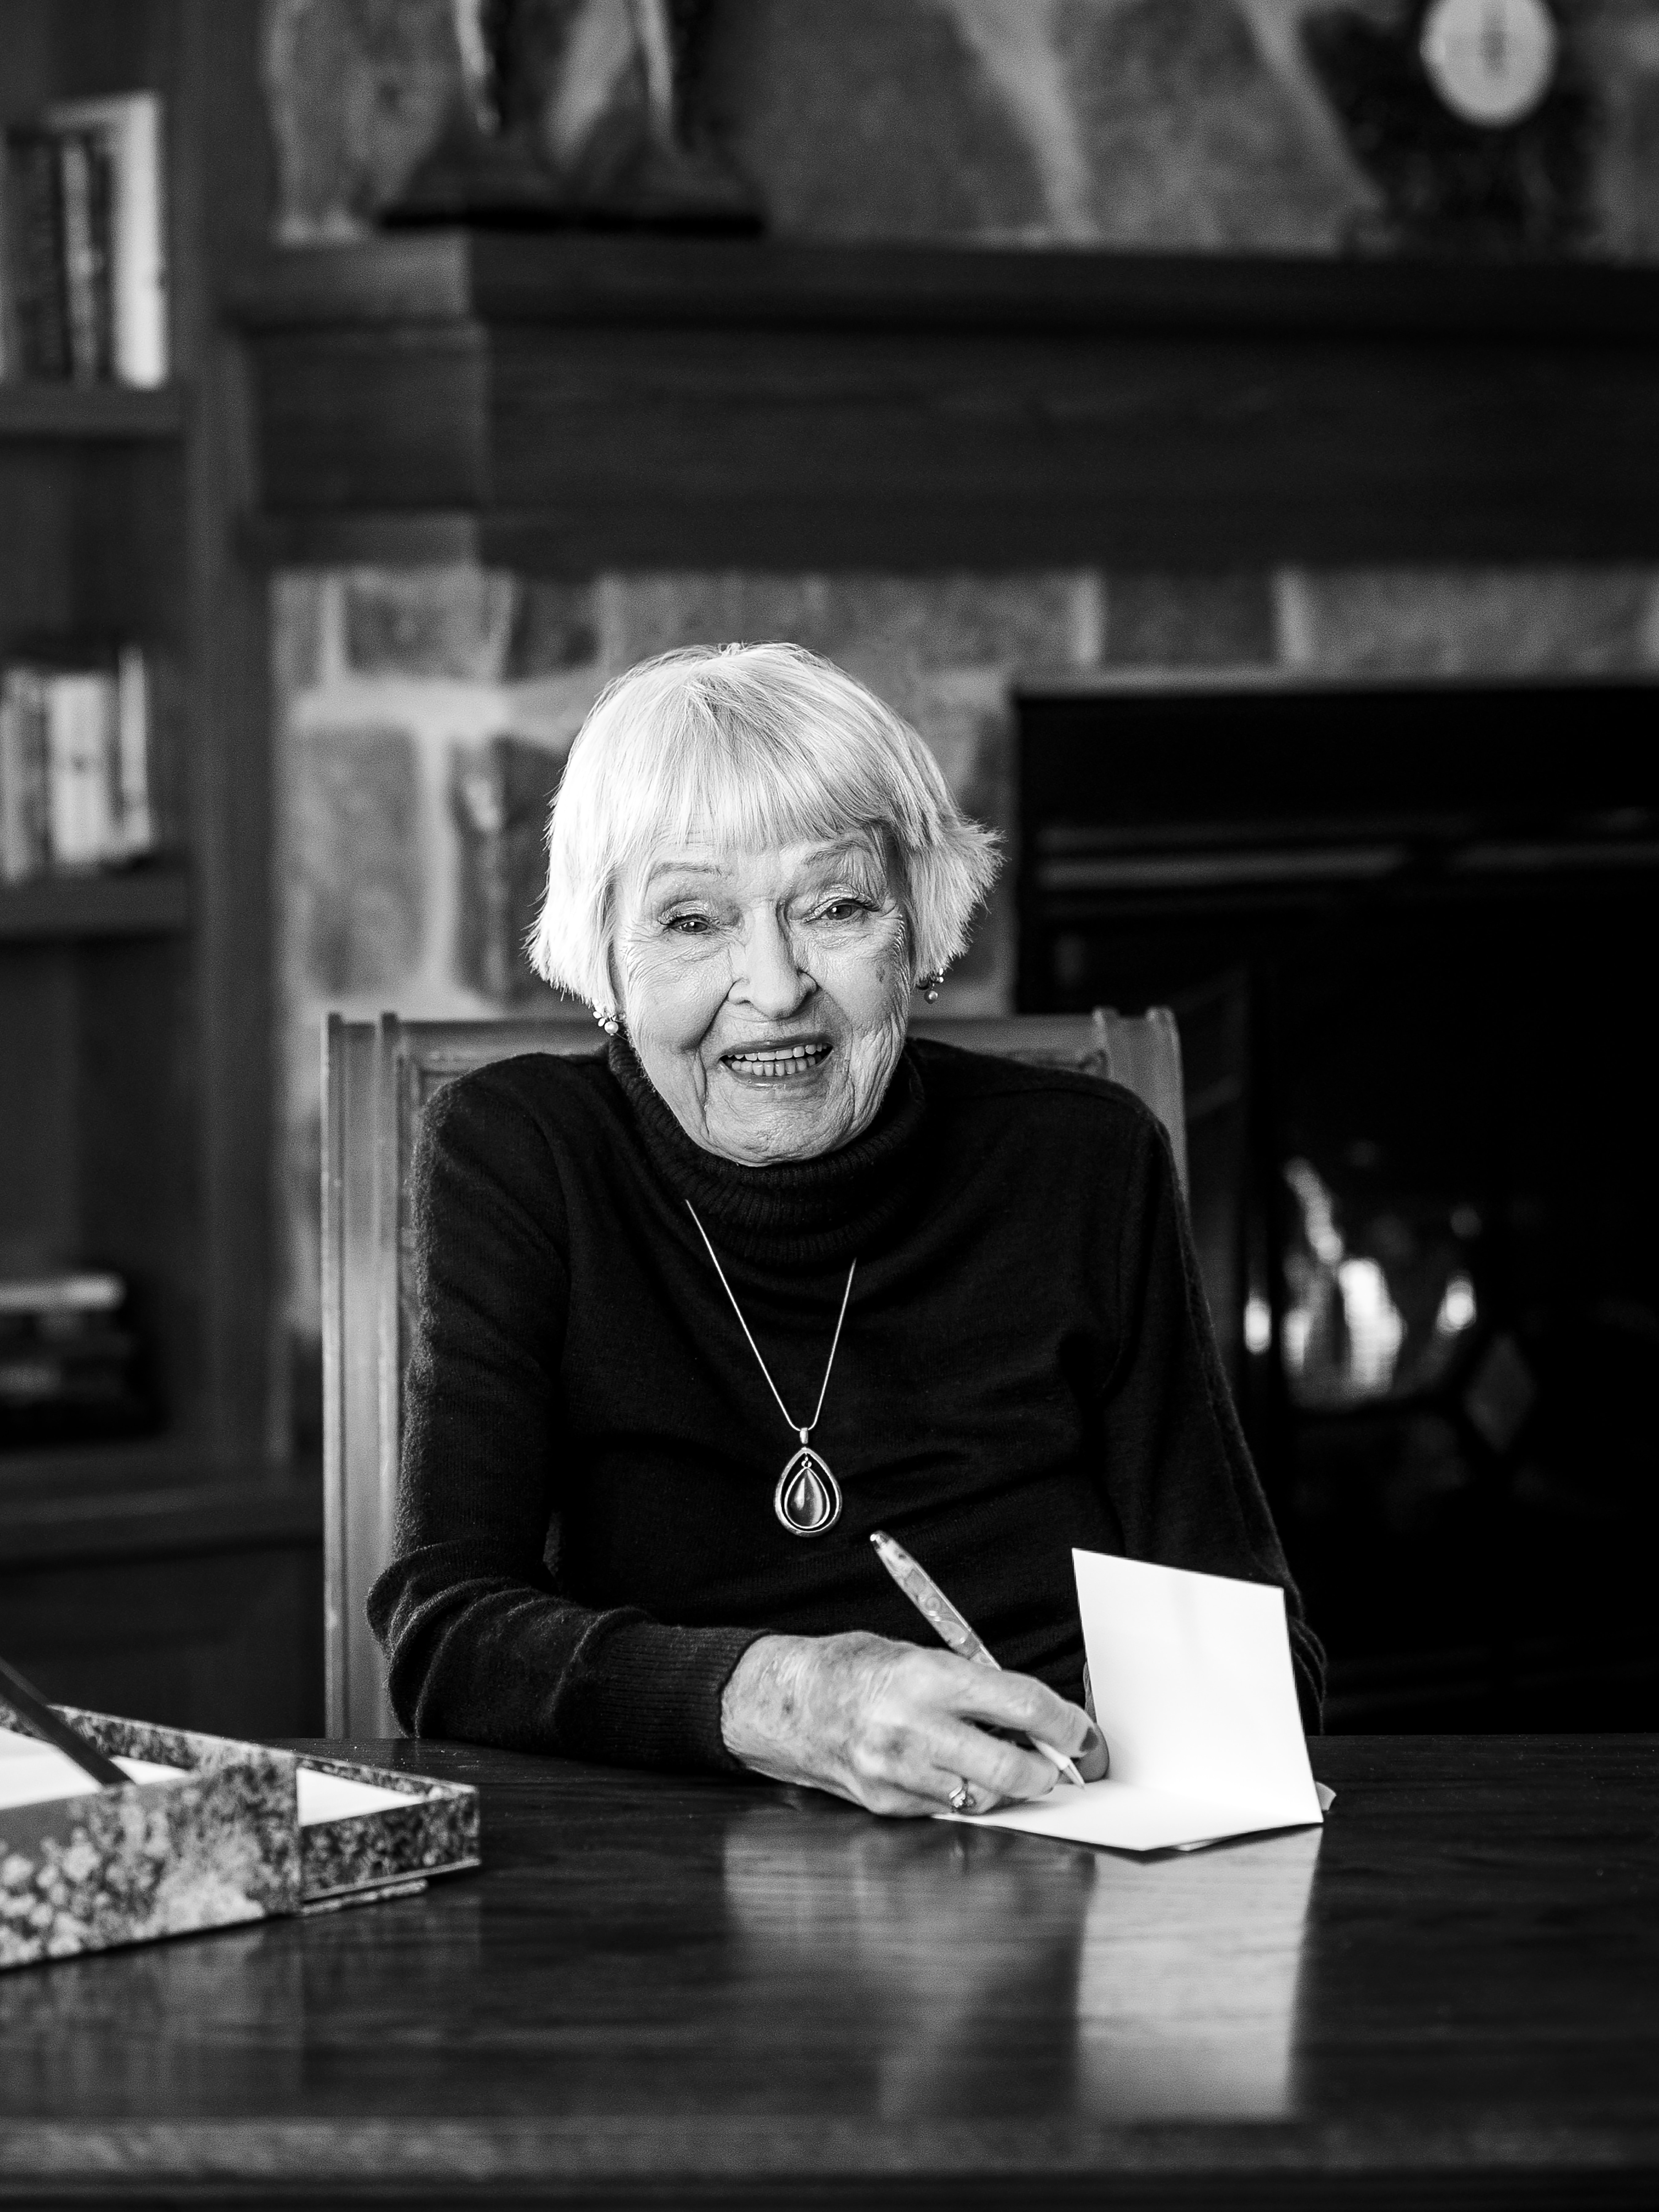 Shirley Charron black and white portrait to showcase her passion for writing letters